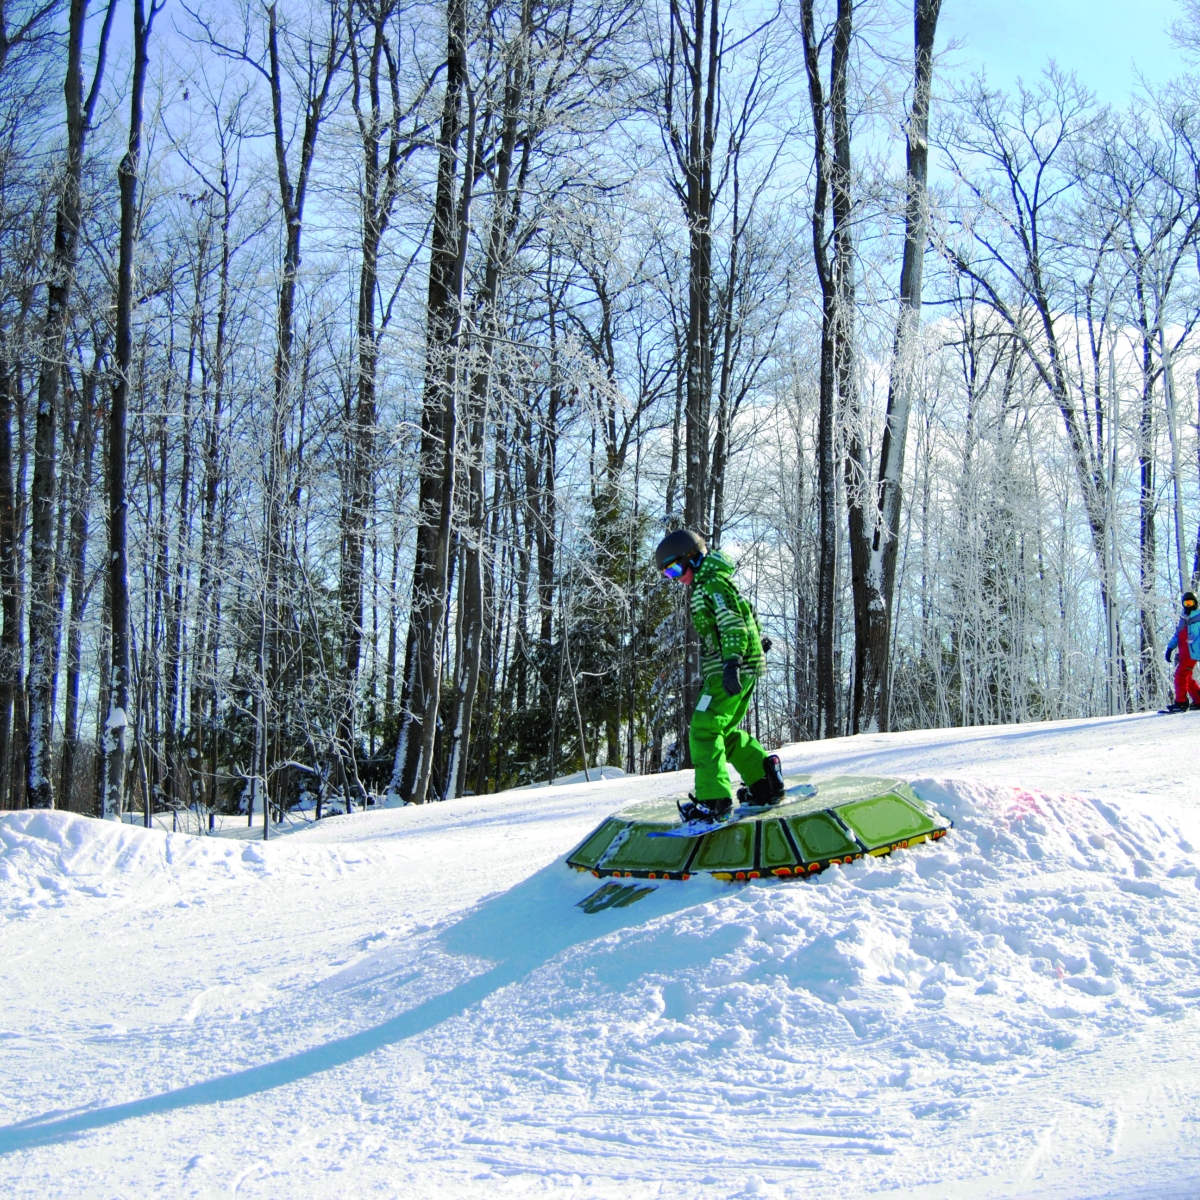 Snowboarder at HoliMont